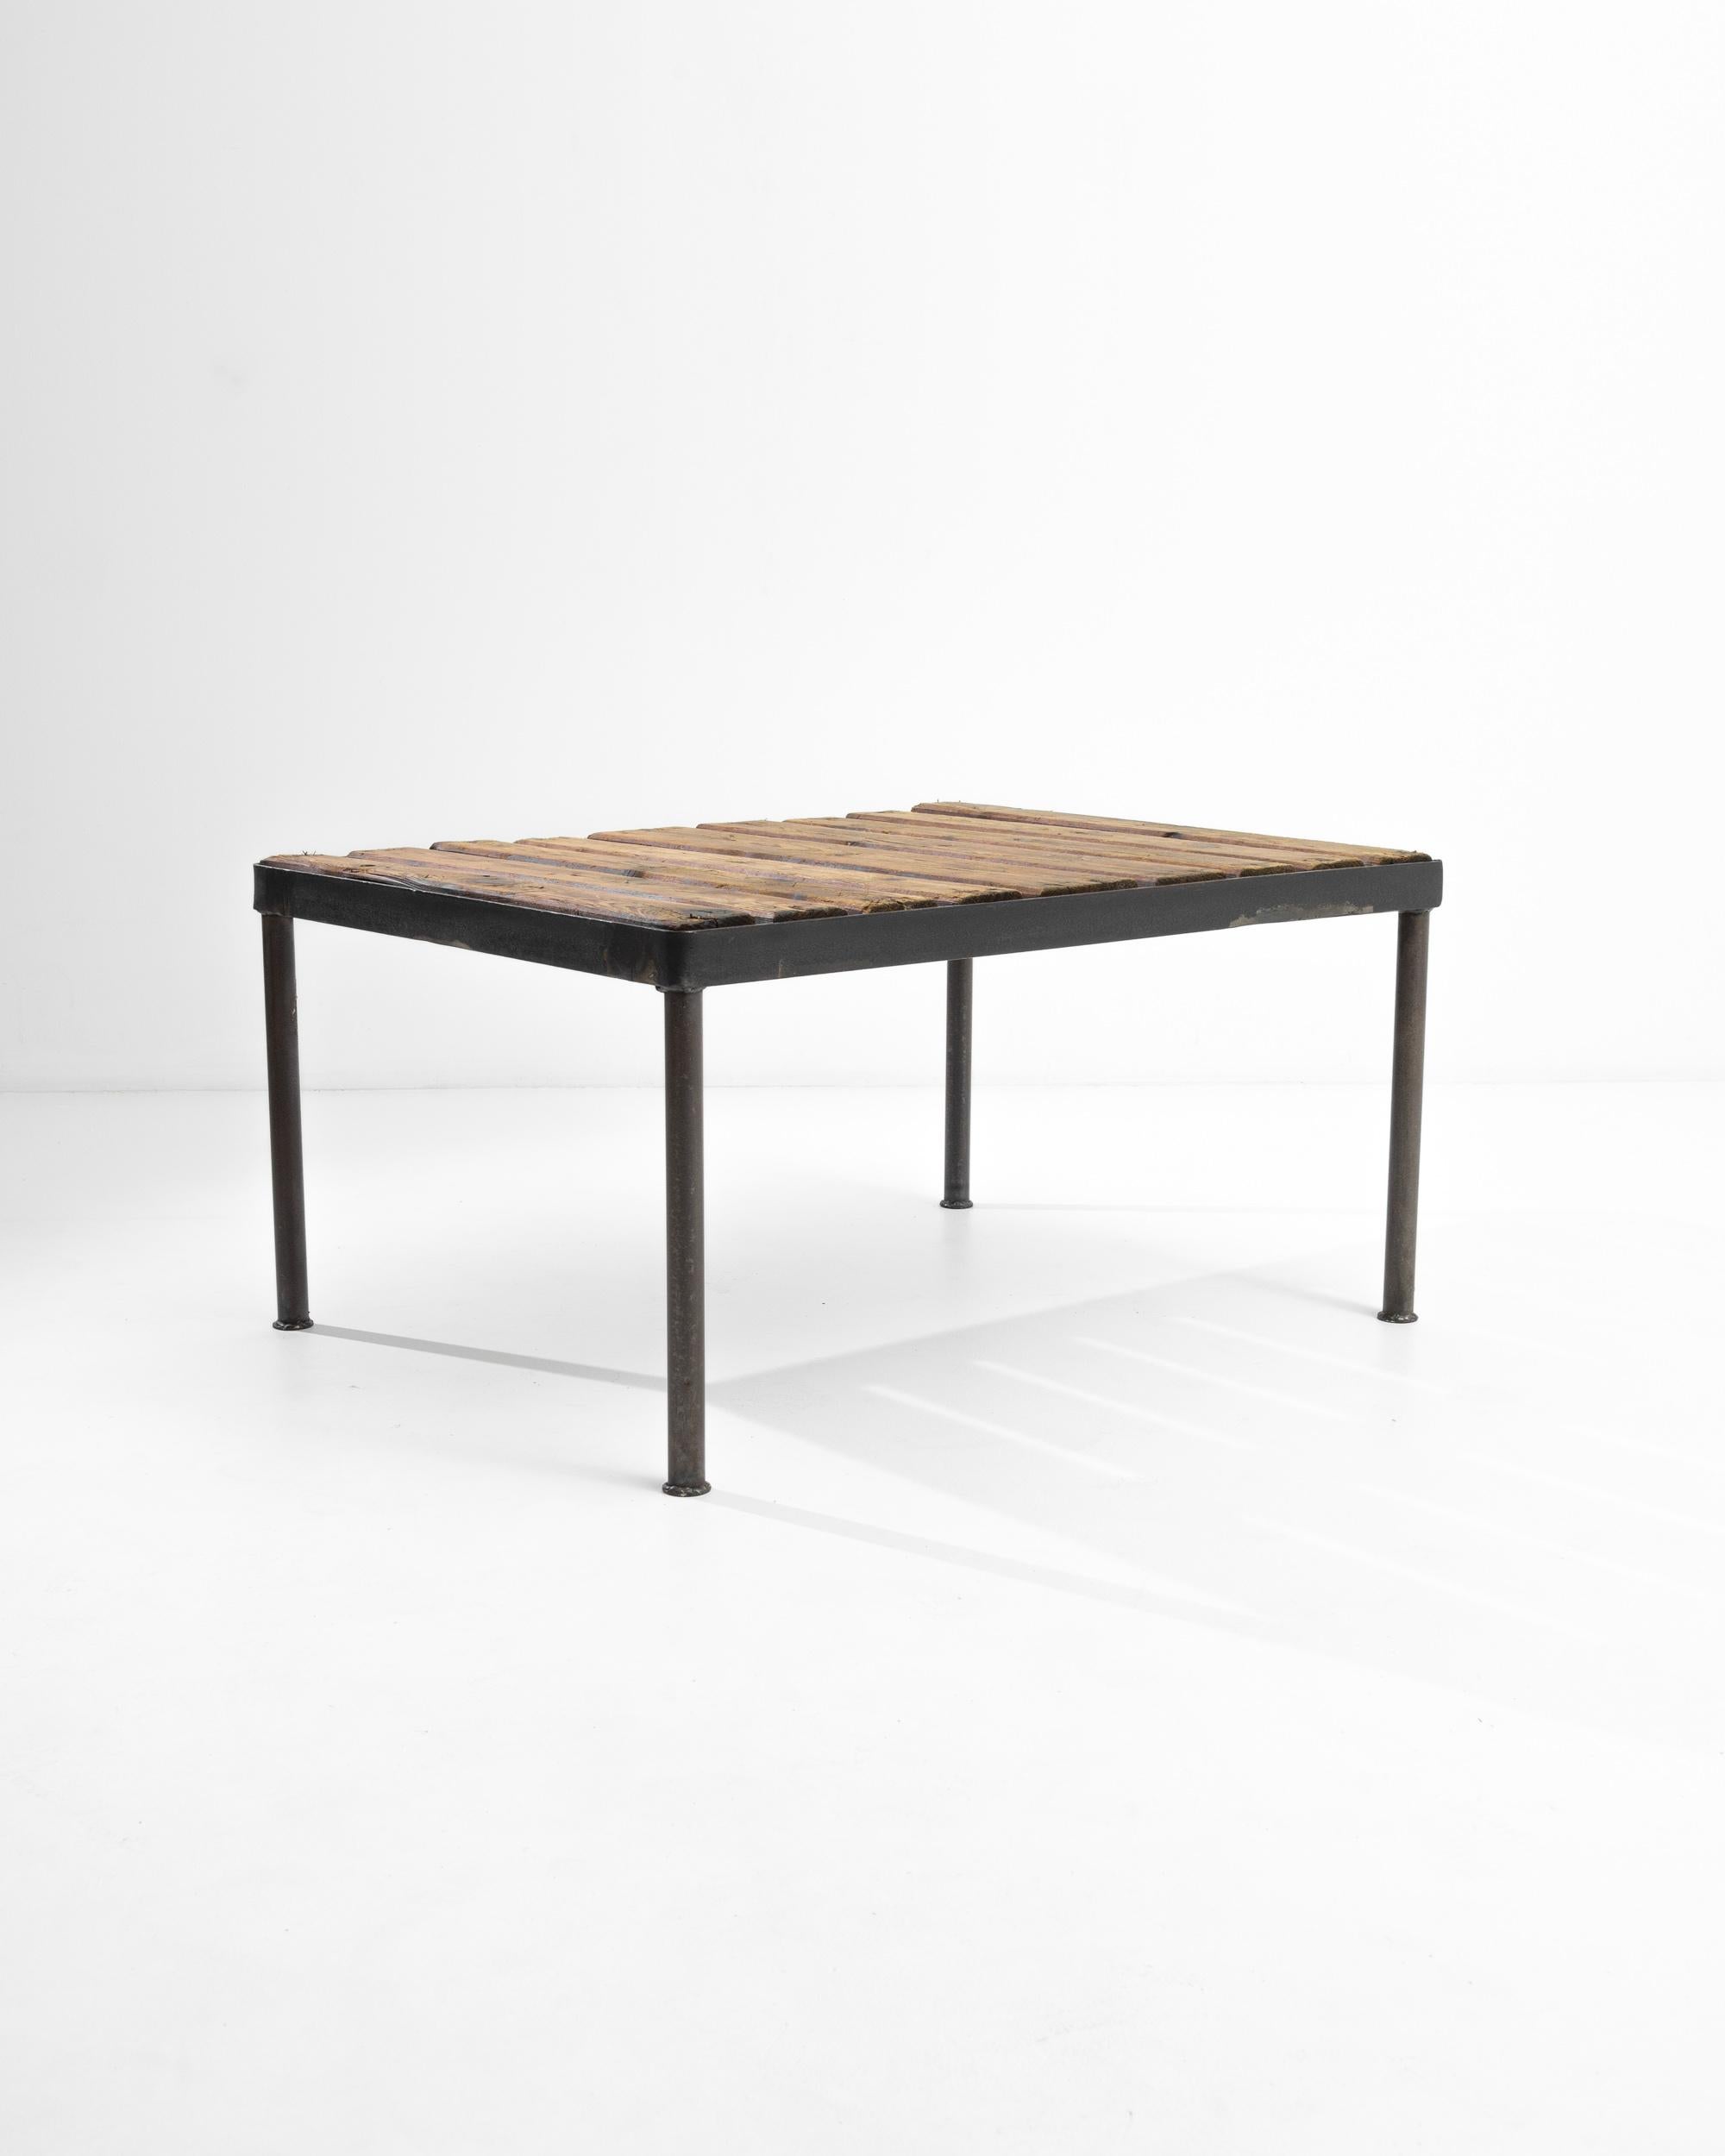 The uncluttered simplicity of this 20th Century French coffee table makes it adaptable for a wide variety of spaces and styles. The wrought iron frame lends the design an industrial inflection, while the organic wooden slats of the tabletop add a